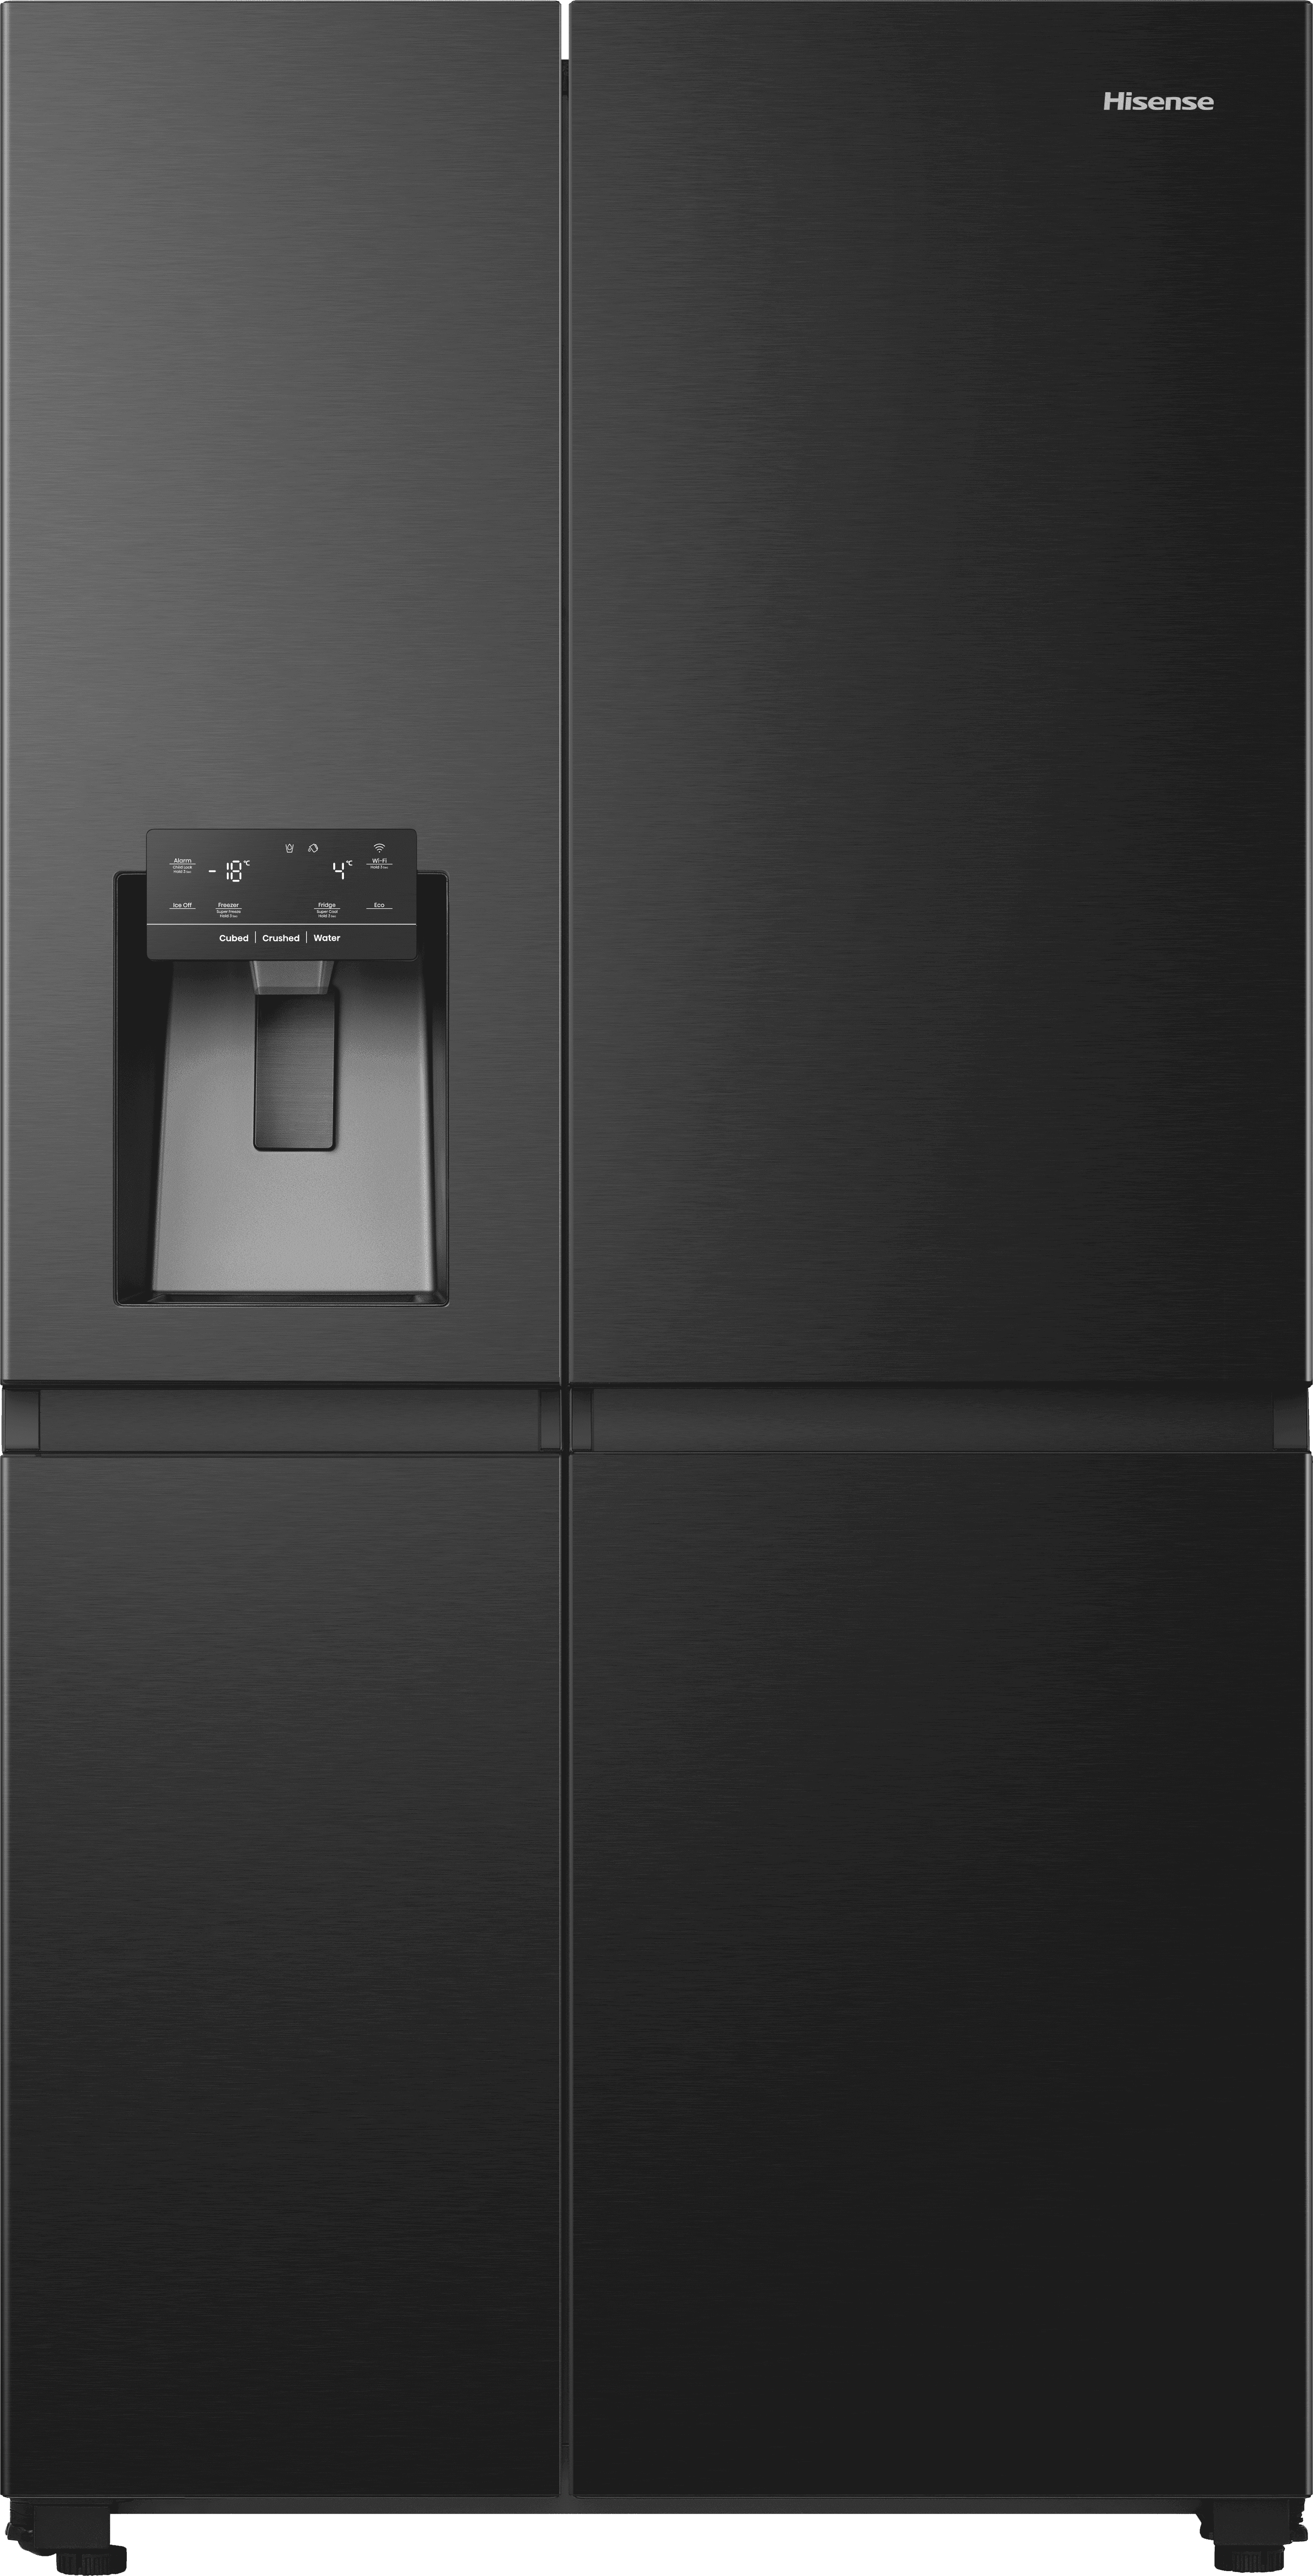 Hisense RS818N4TFE Wifi Connected Non-Plumbed Total No Frost American Fridge Freezer - Black / Stainless Steel - E Rated, Black